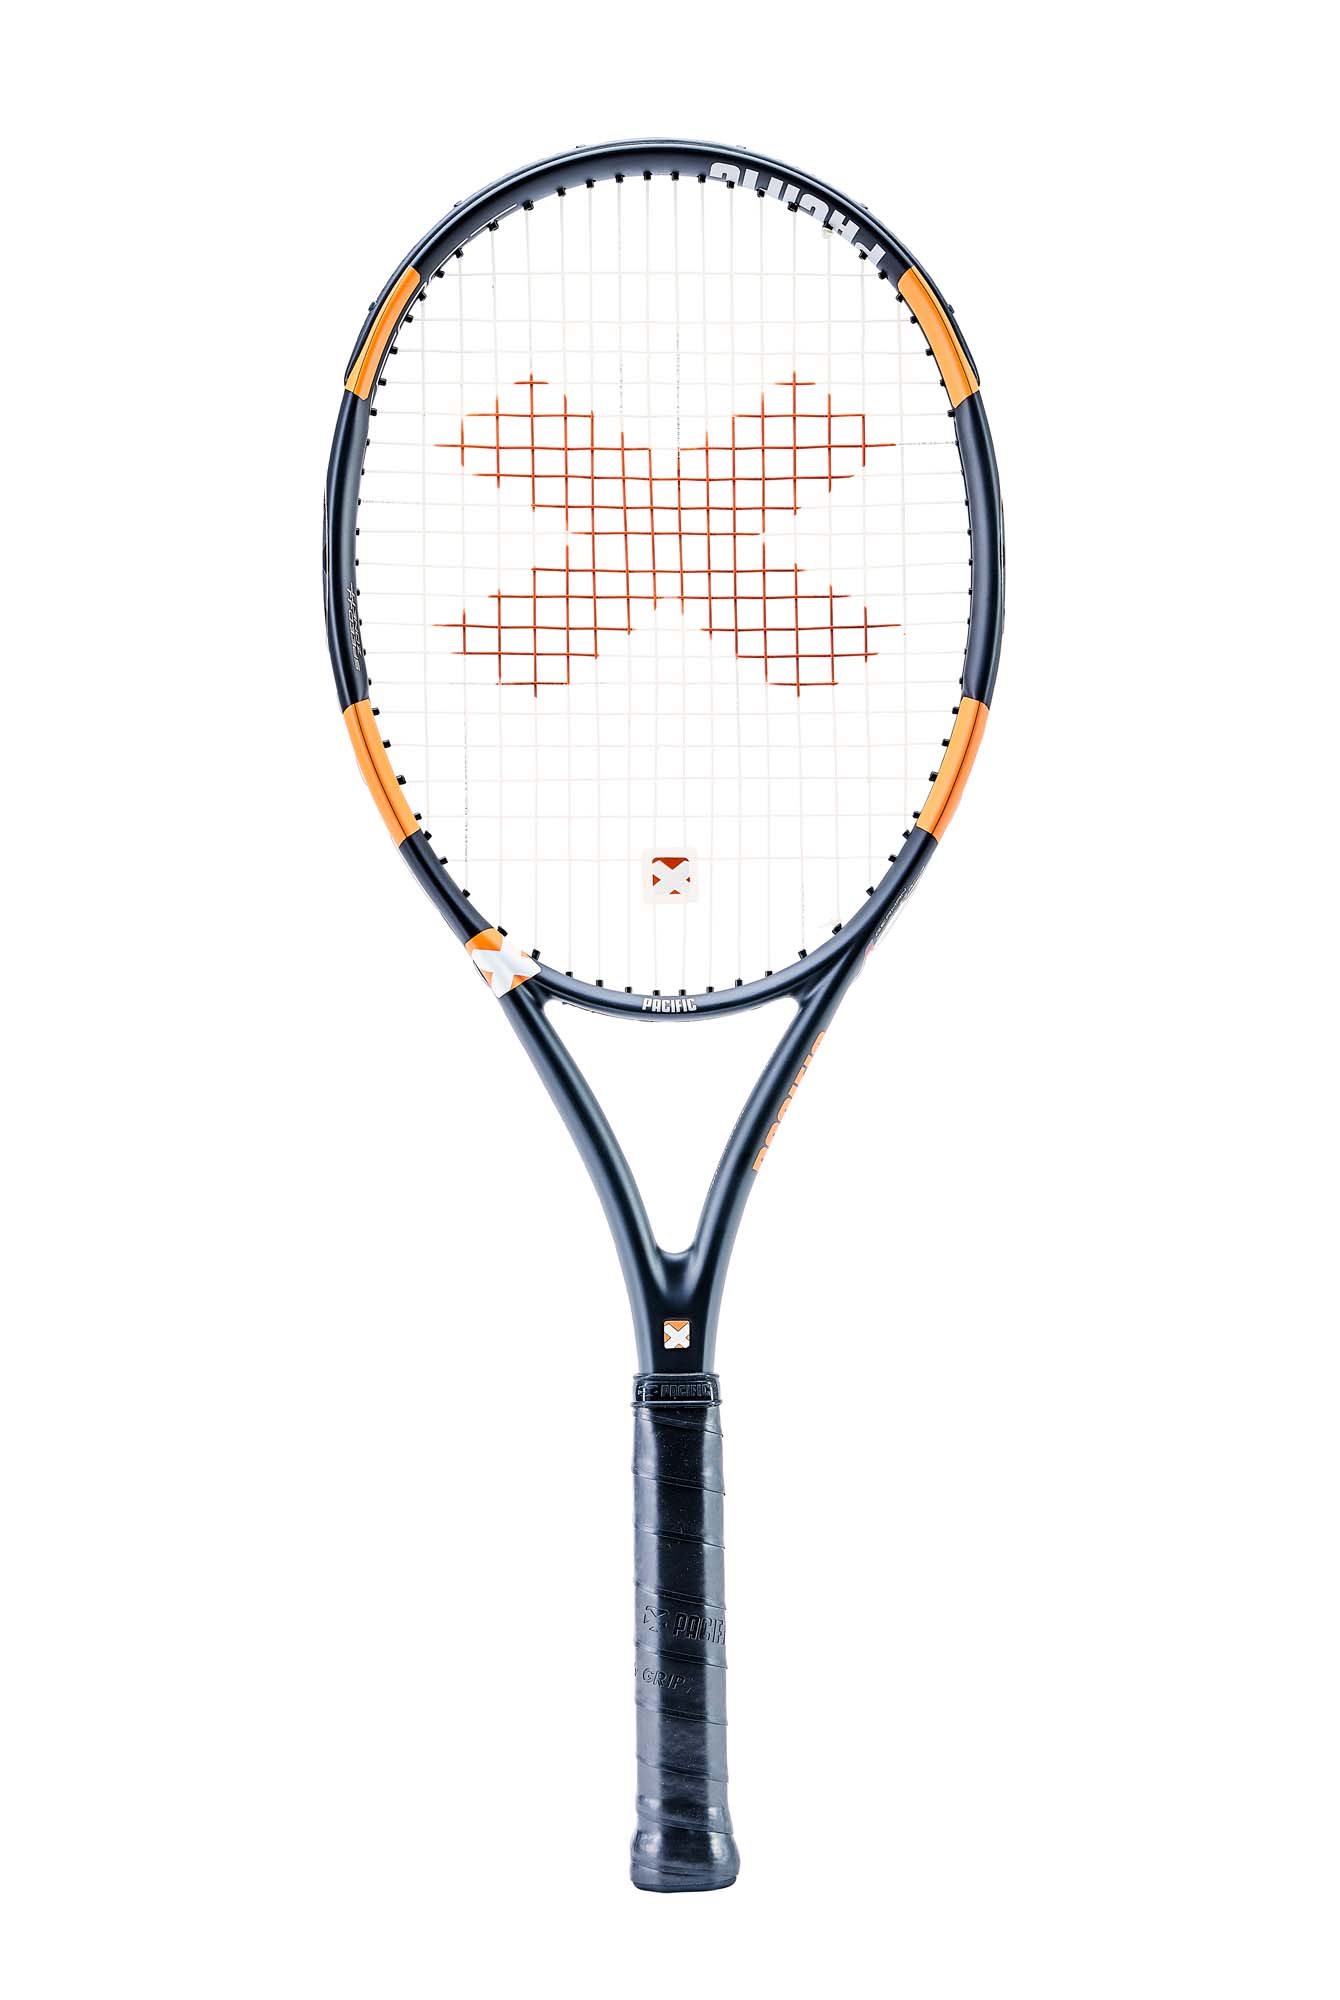 pacific racket x fast pro